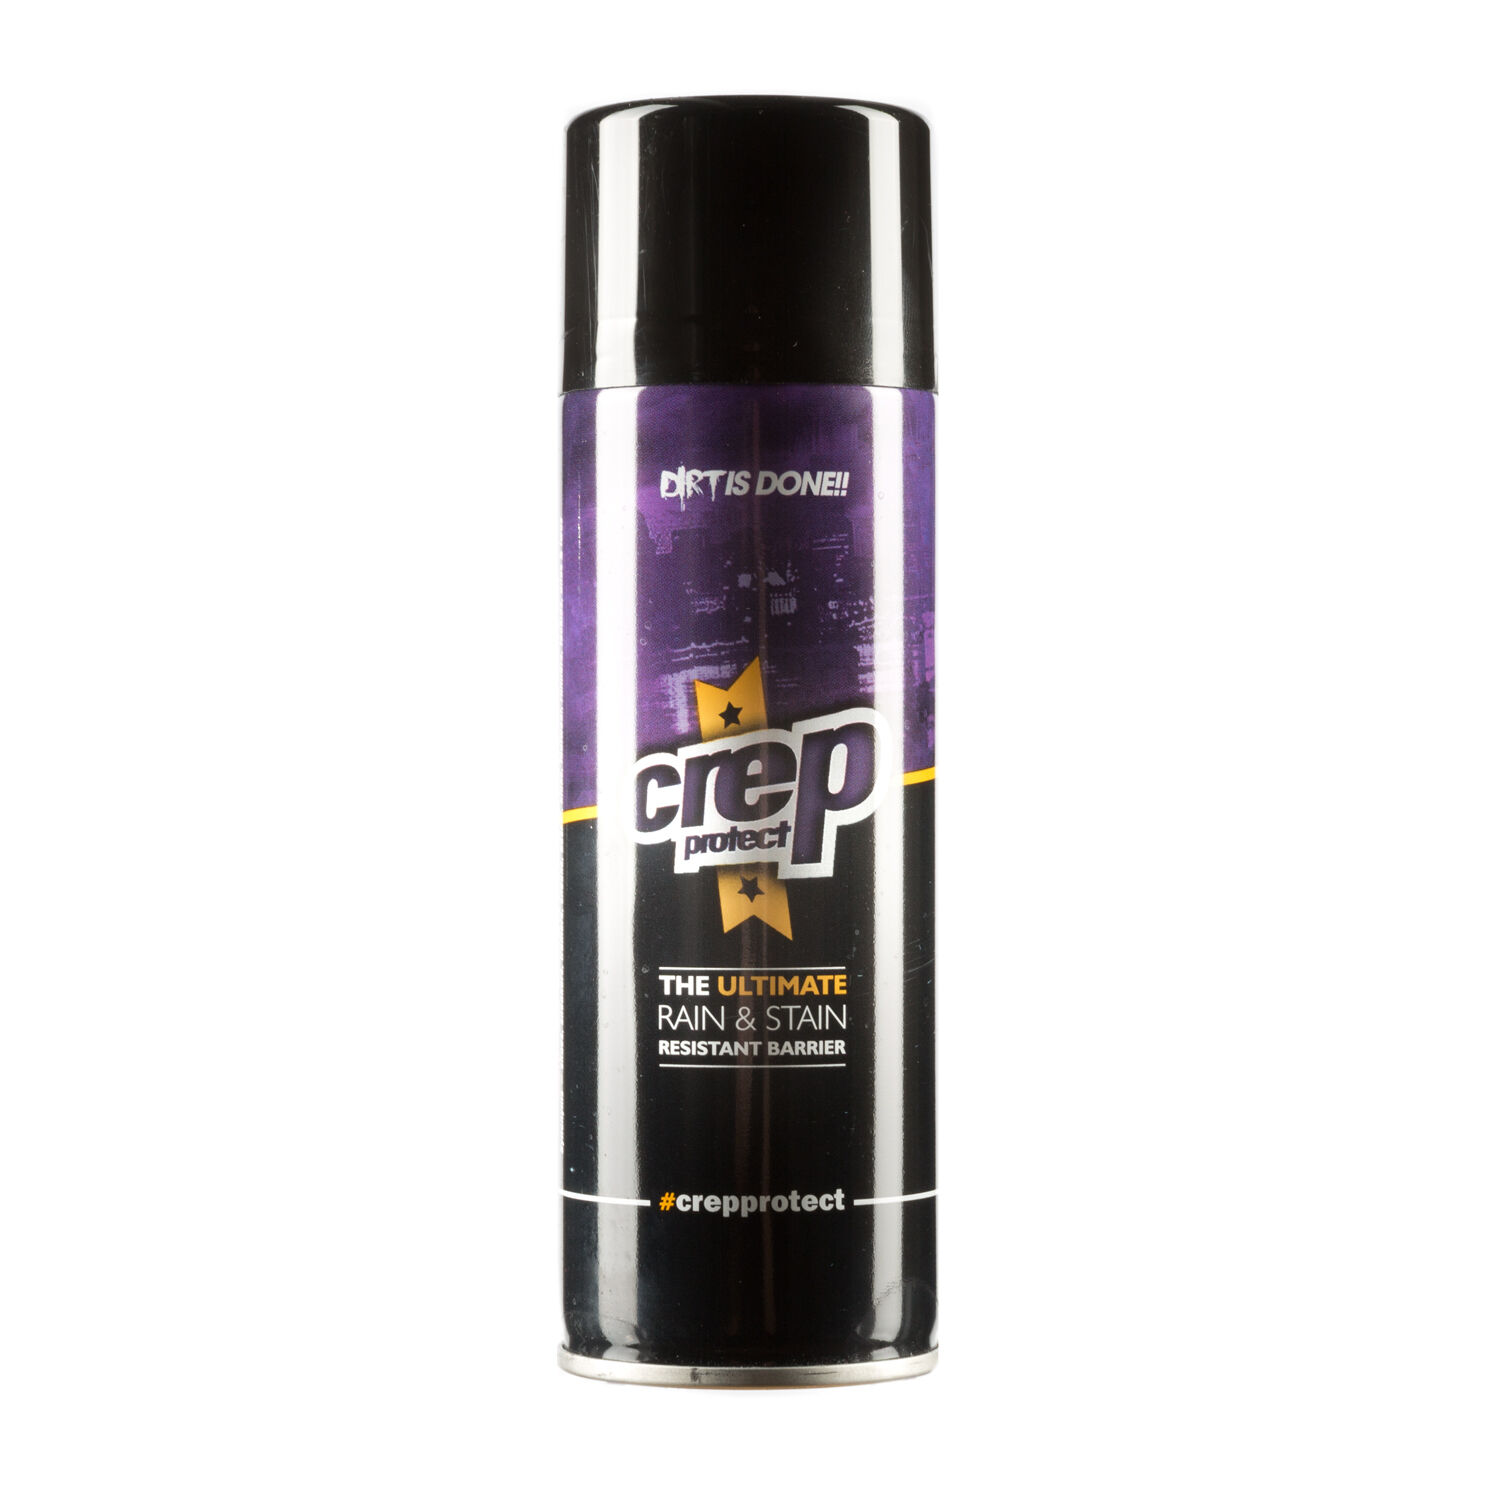 The Art Of Crep Protect Spray 5oz One Can Rain Stain Resistant Shoes Barrier